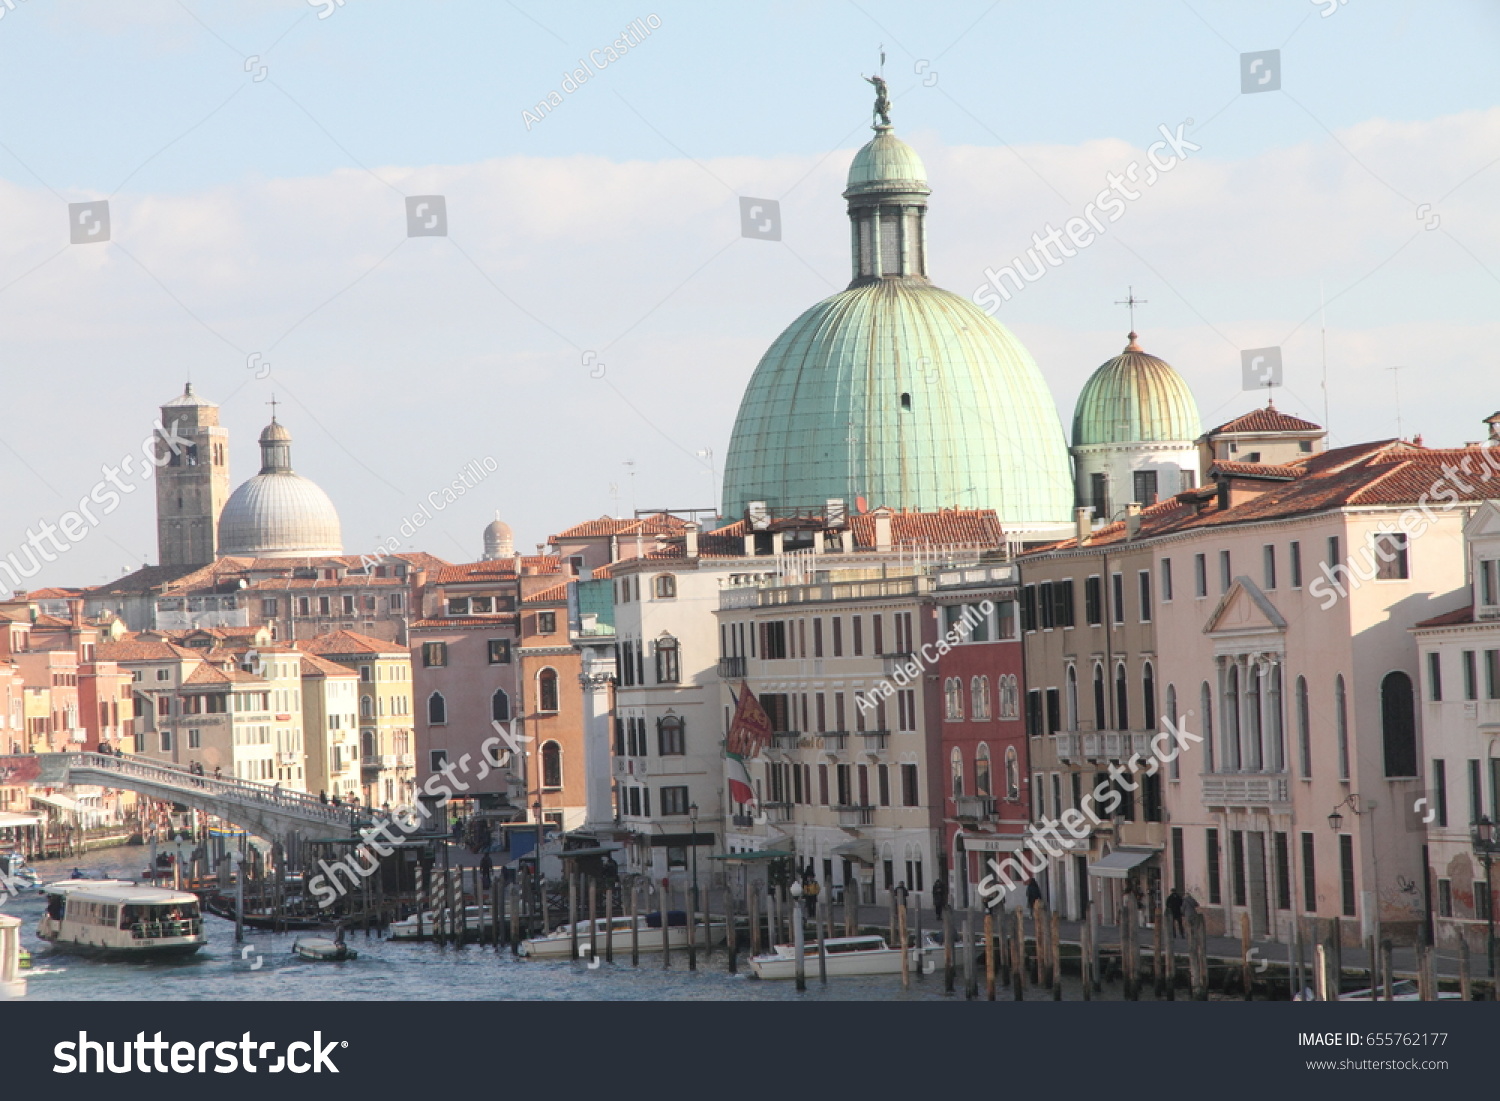 San Simeon Piccolo  in the Grand Canal Venice on January 27, 2015 #655762177